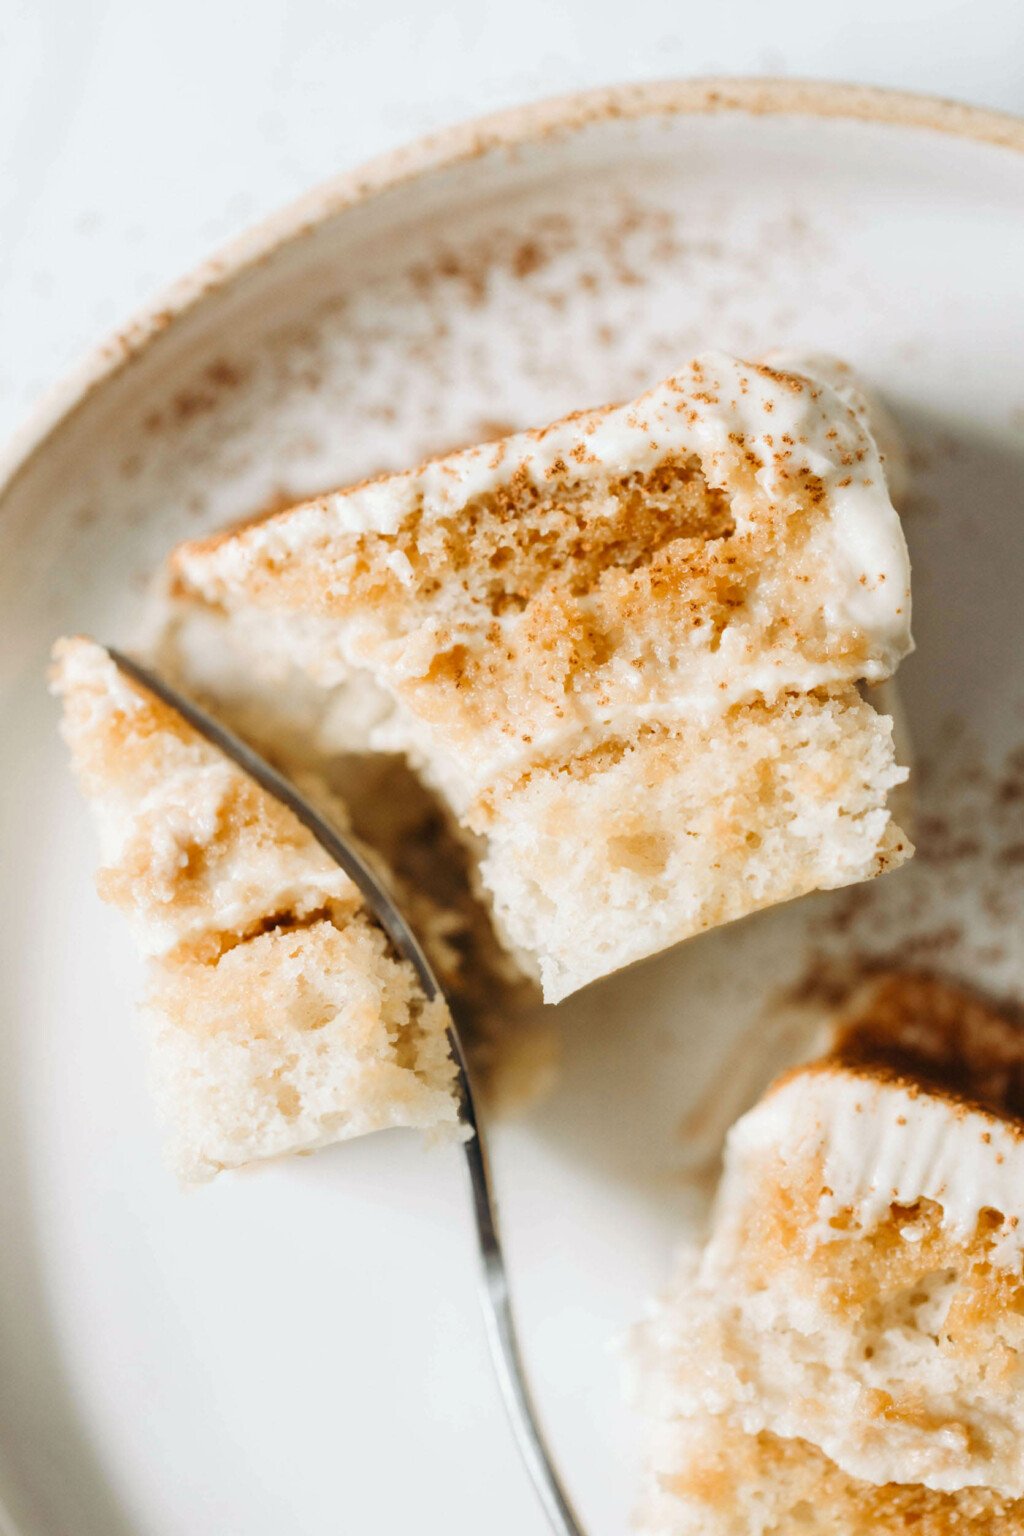 A fluffy and creamy slice of vegan tiramisu has been dusted with cocoa. It's being cut with a fork.